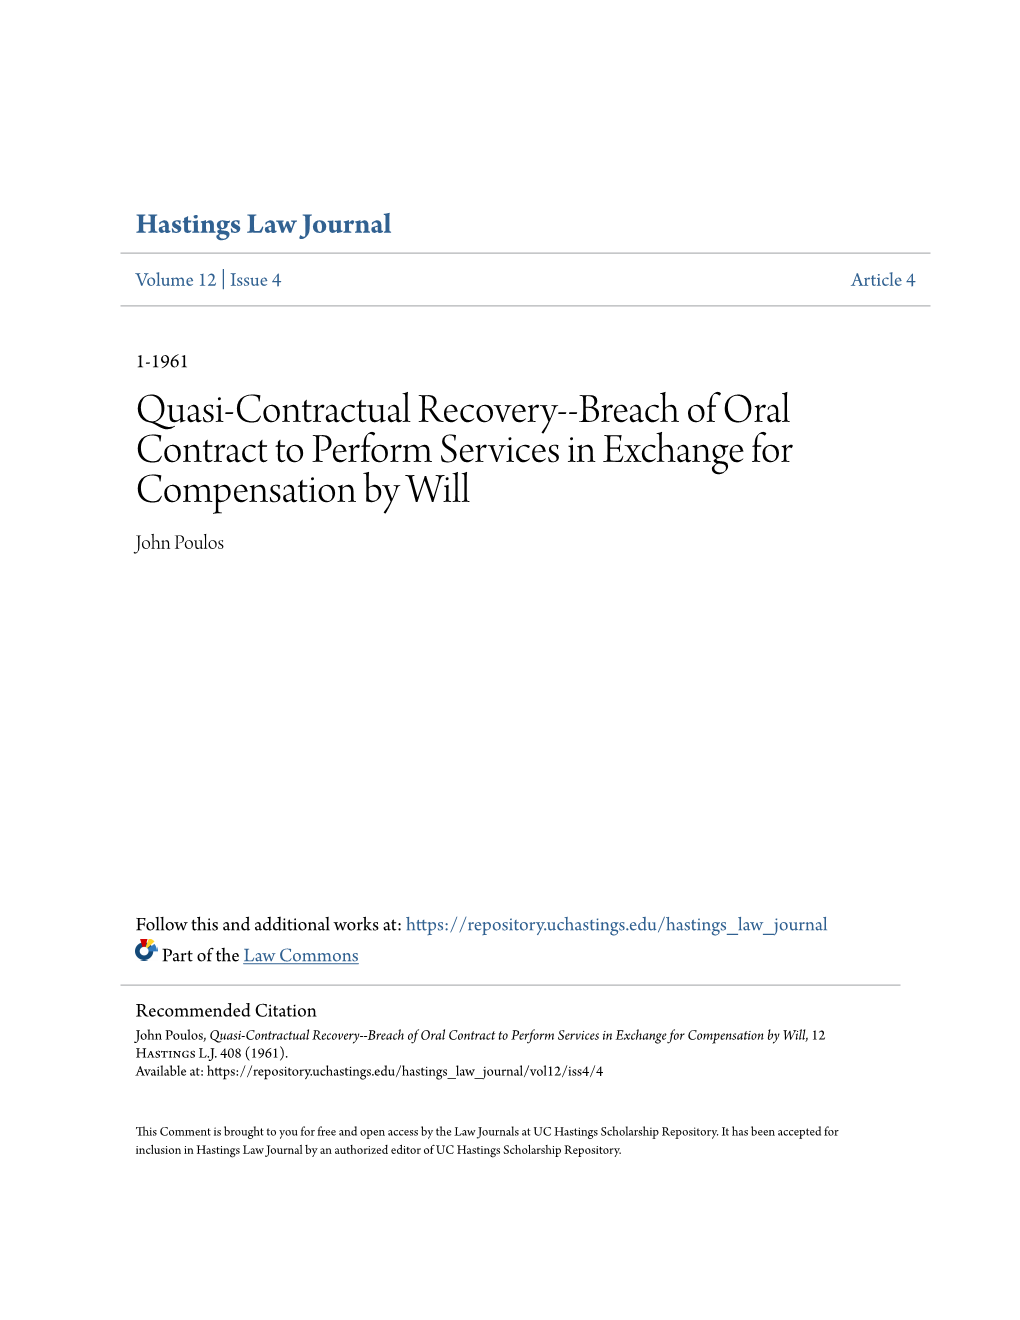 Quasi-Contractual Recovery--Breach of Oral Contract to Perform Services in Exchange for Compensation by Will John Poulos